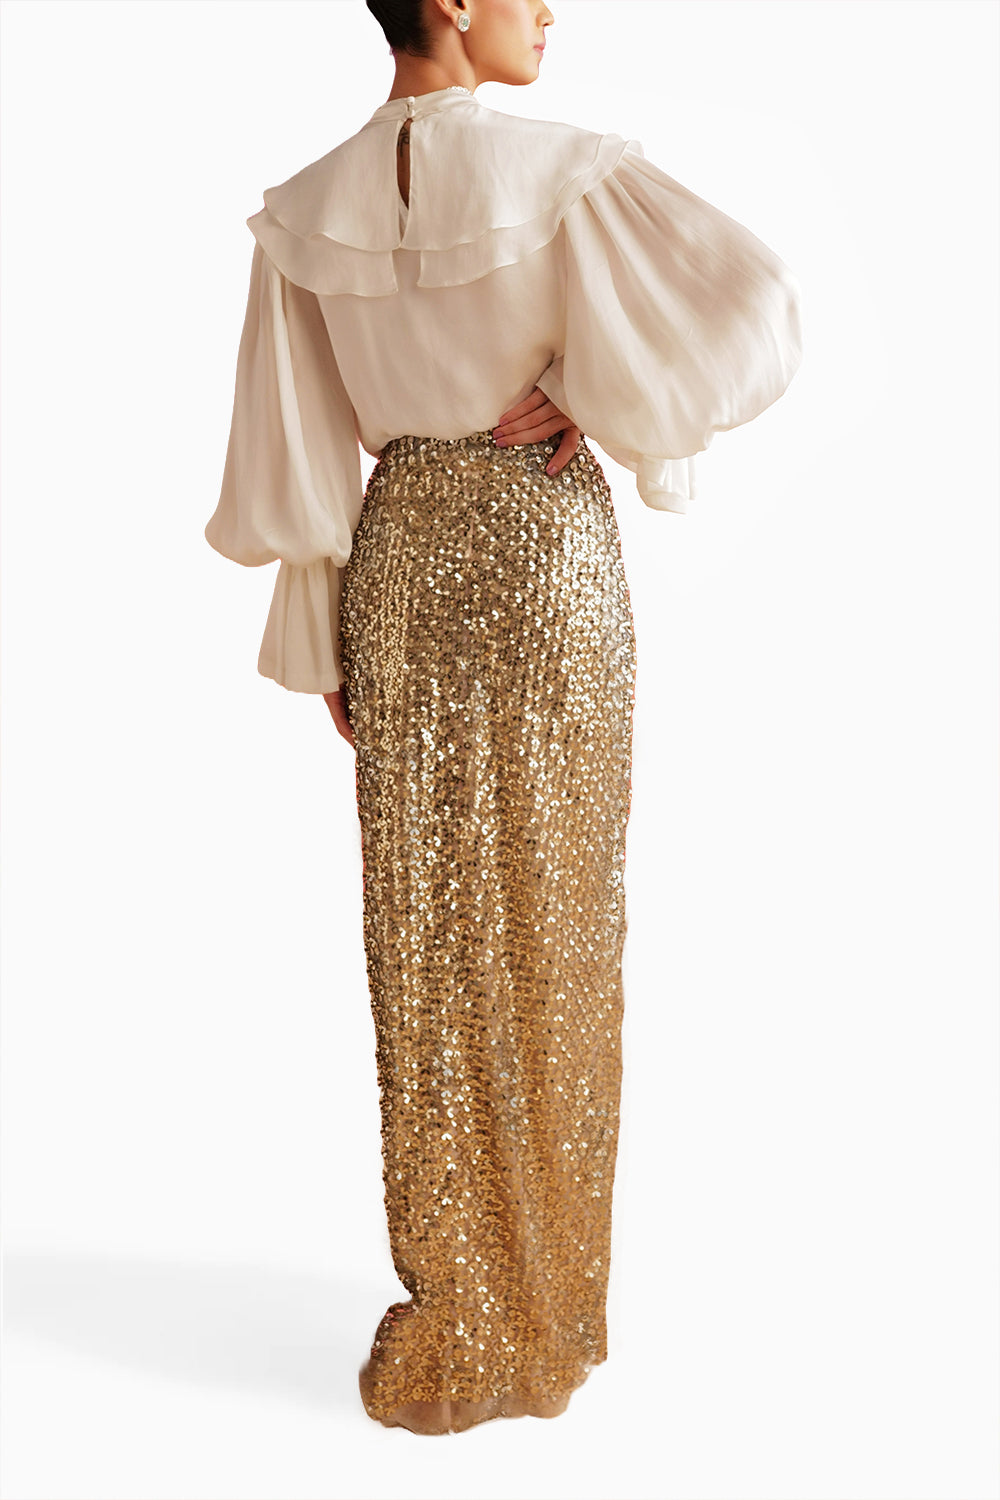 Ivory Antonella Top with Silver Glees Skirt